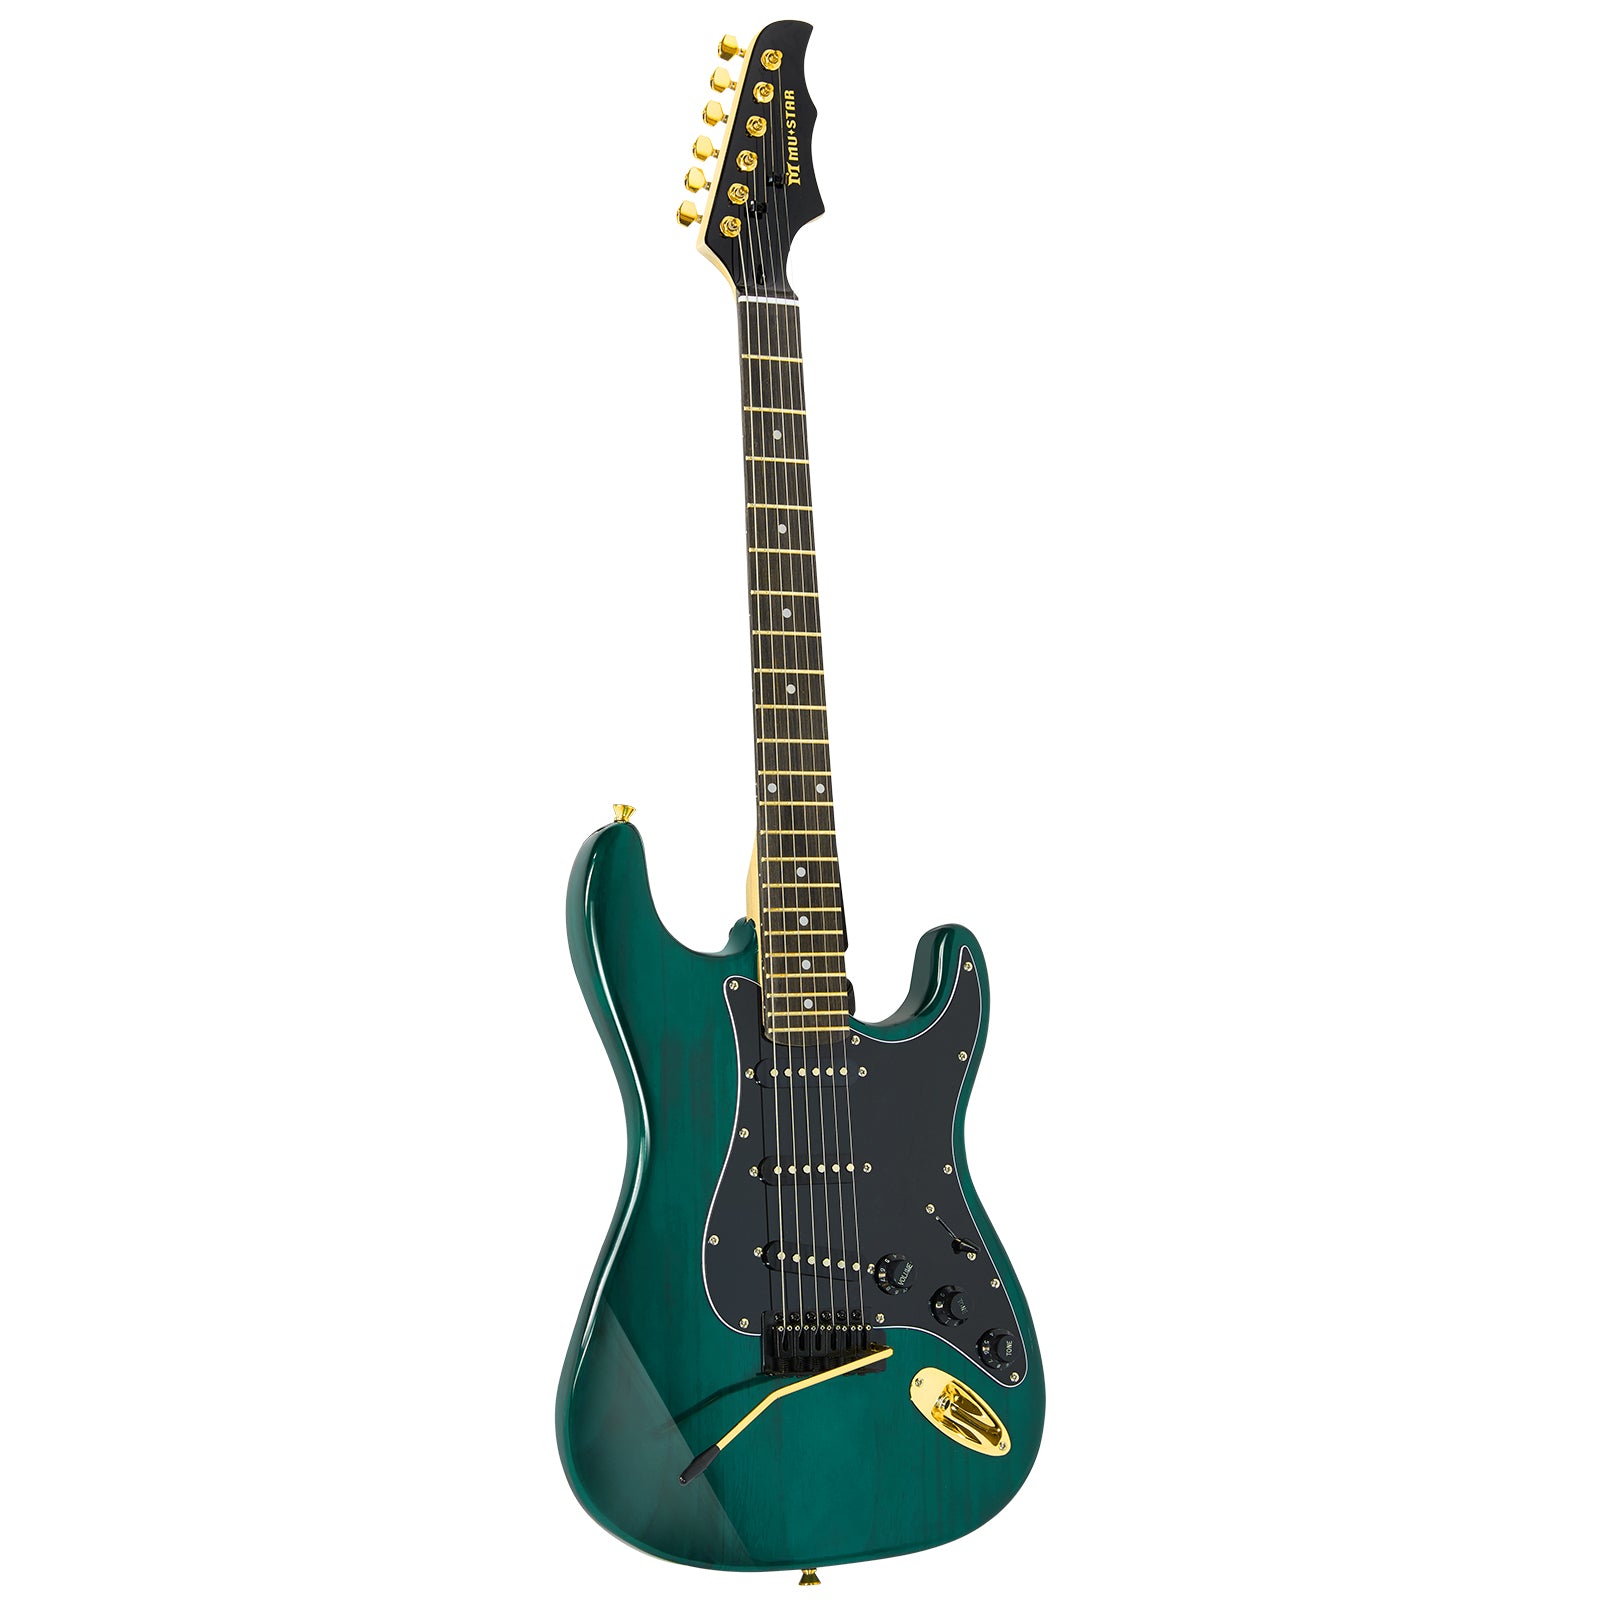 MUSTAR MEG-100, Electric Guitar Kit with 25W Amplifier, Solid Wood Electric Guitar Kits Beginner(Ripple Green)